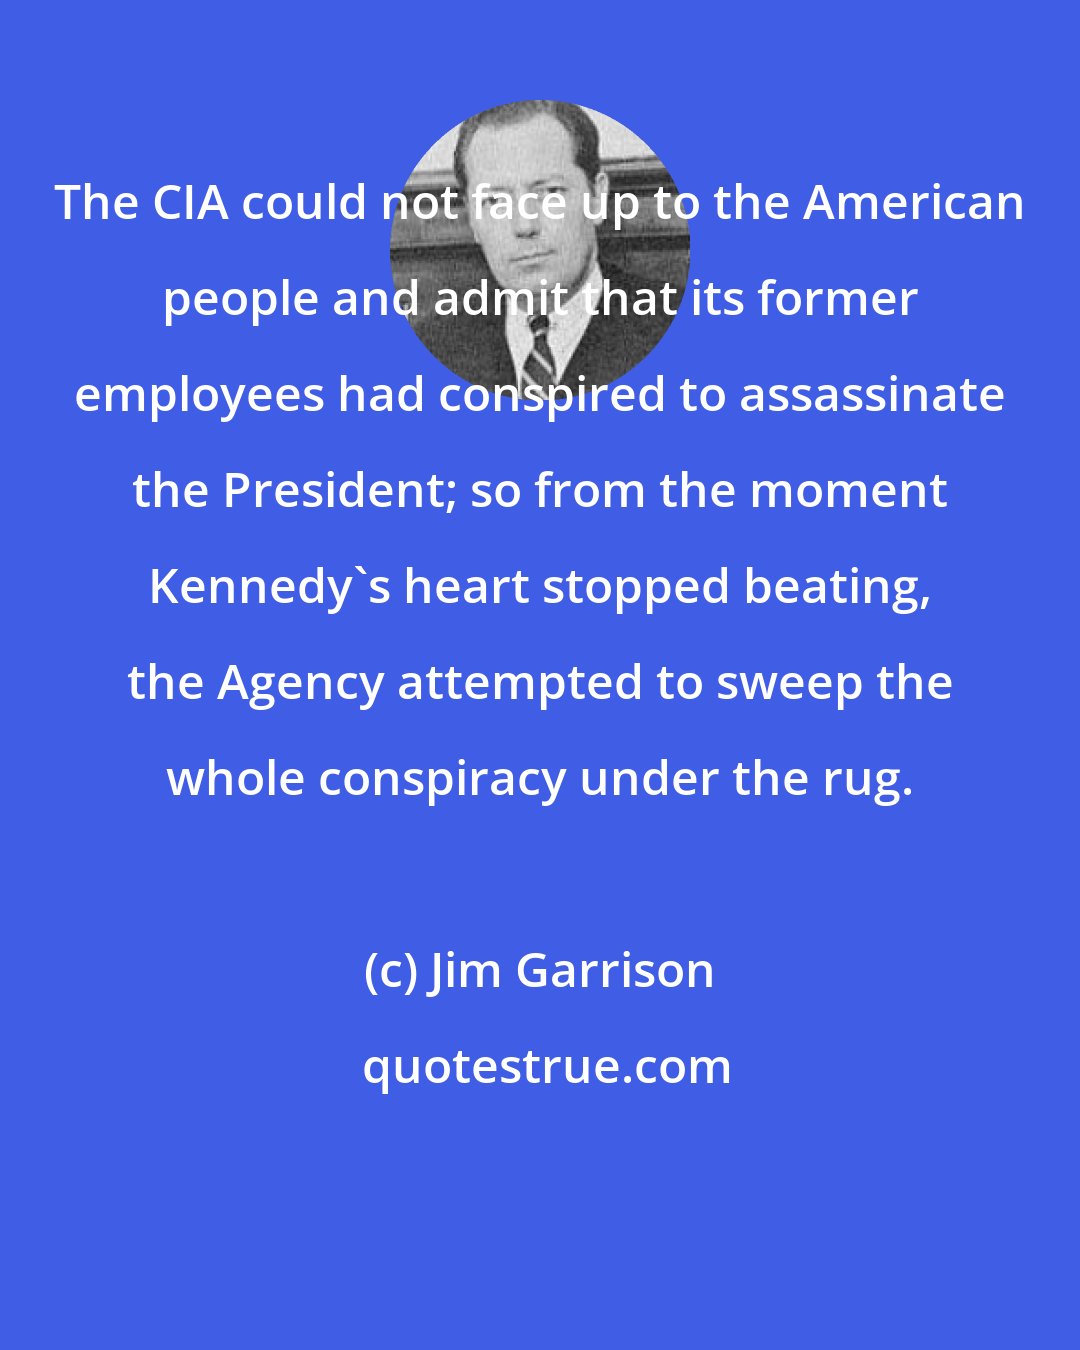 Jim Garrison: The CIA could not face up to the American people and admit that its former employees had conspired to assassinate the President; so from the moment Kennedy's heart stopped beating, the Agency attempted to sweep the whole conspiracy under the rug.